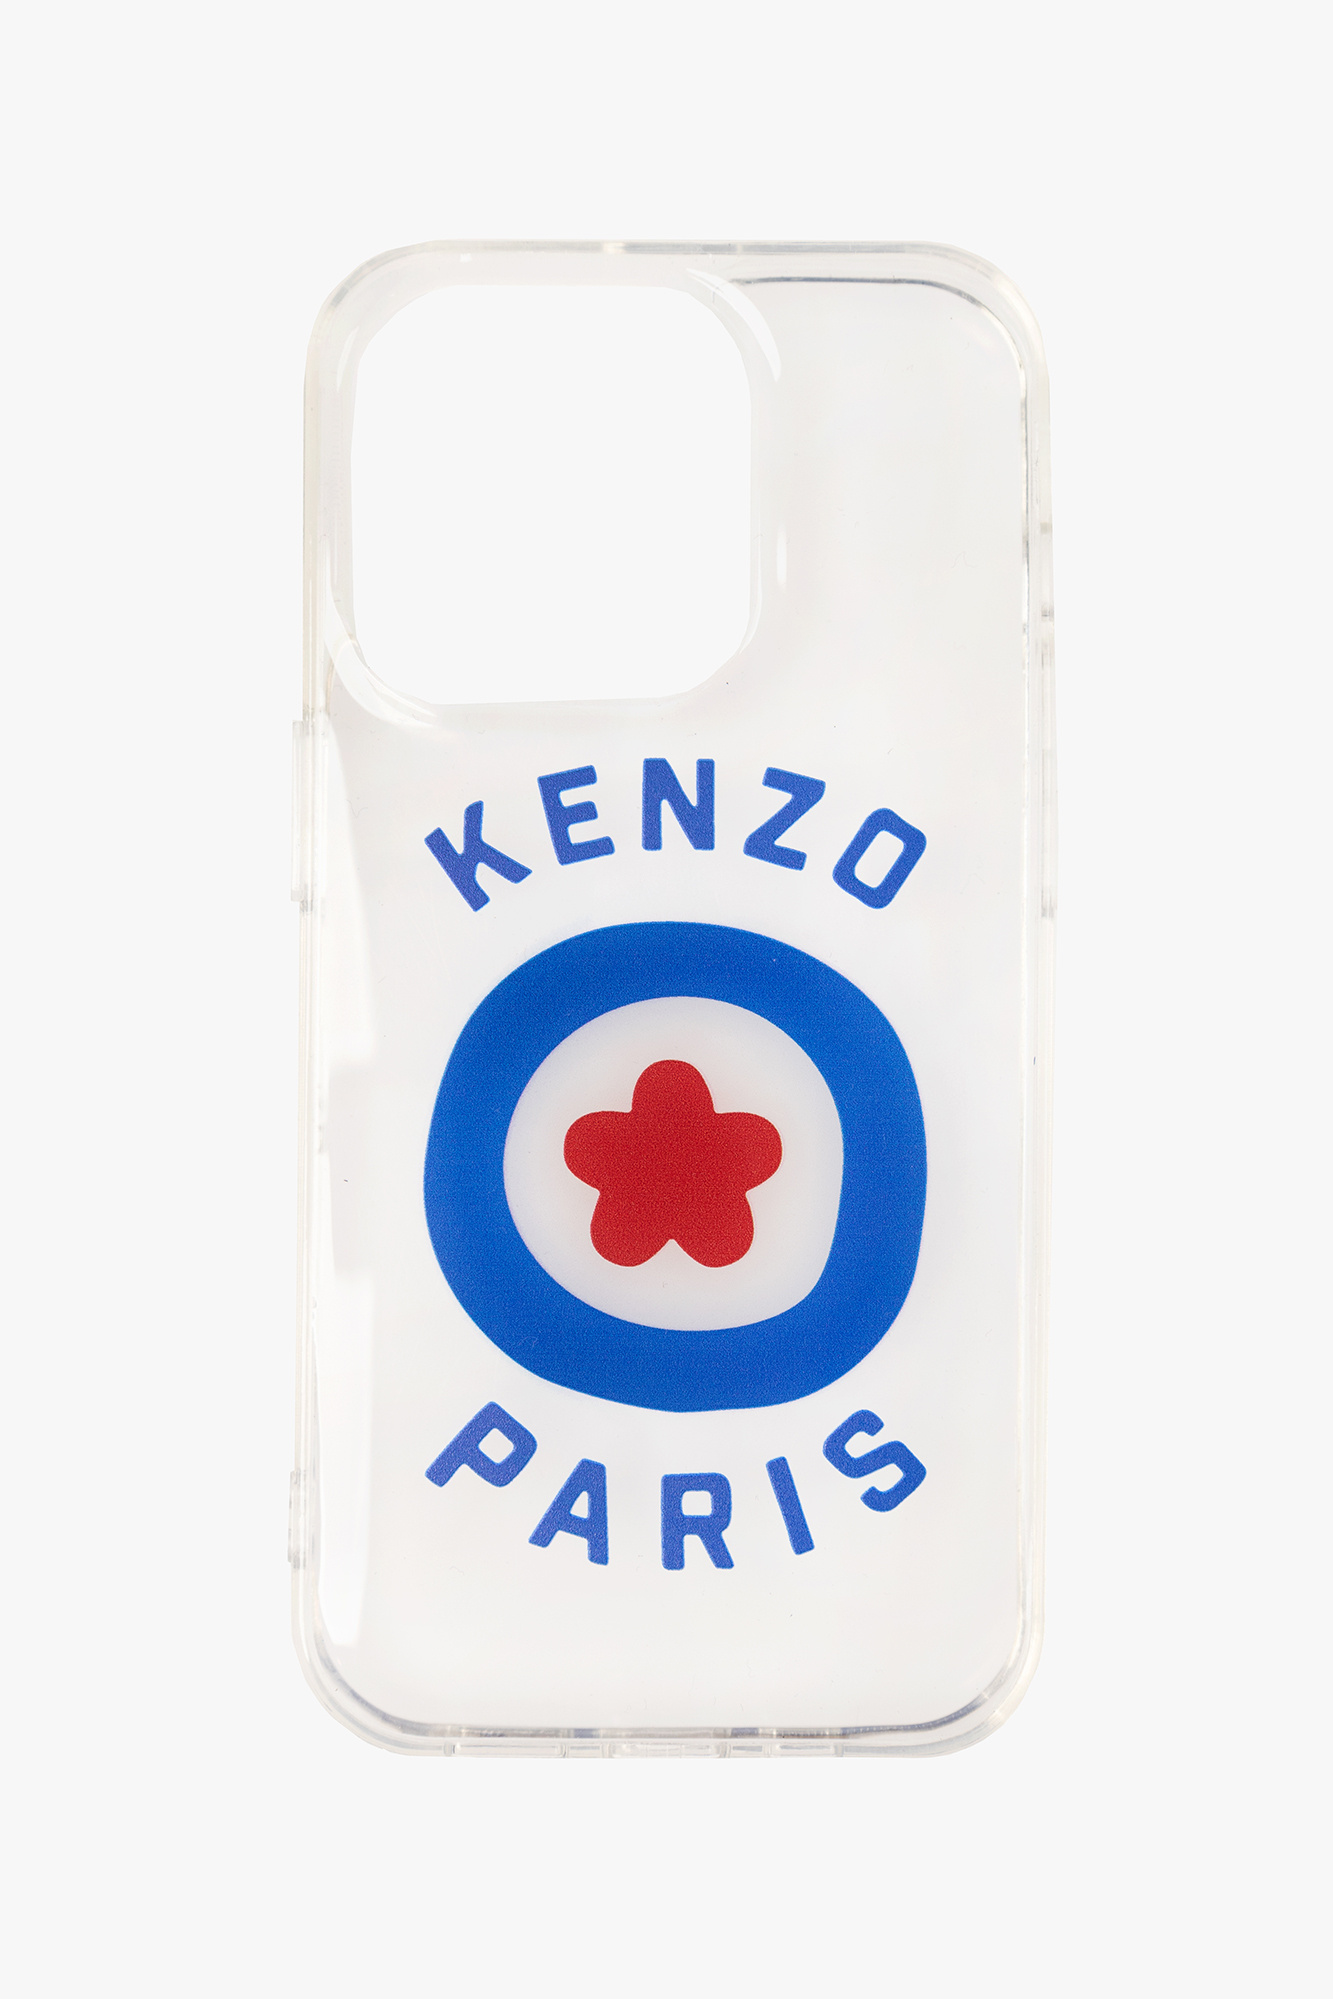 Kenzo Download the latest version of the app